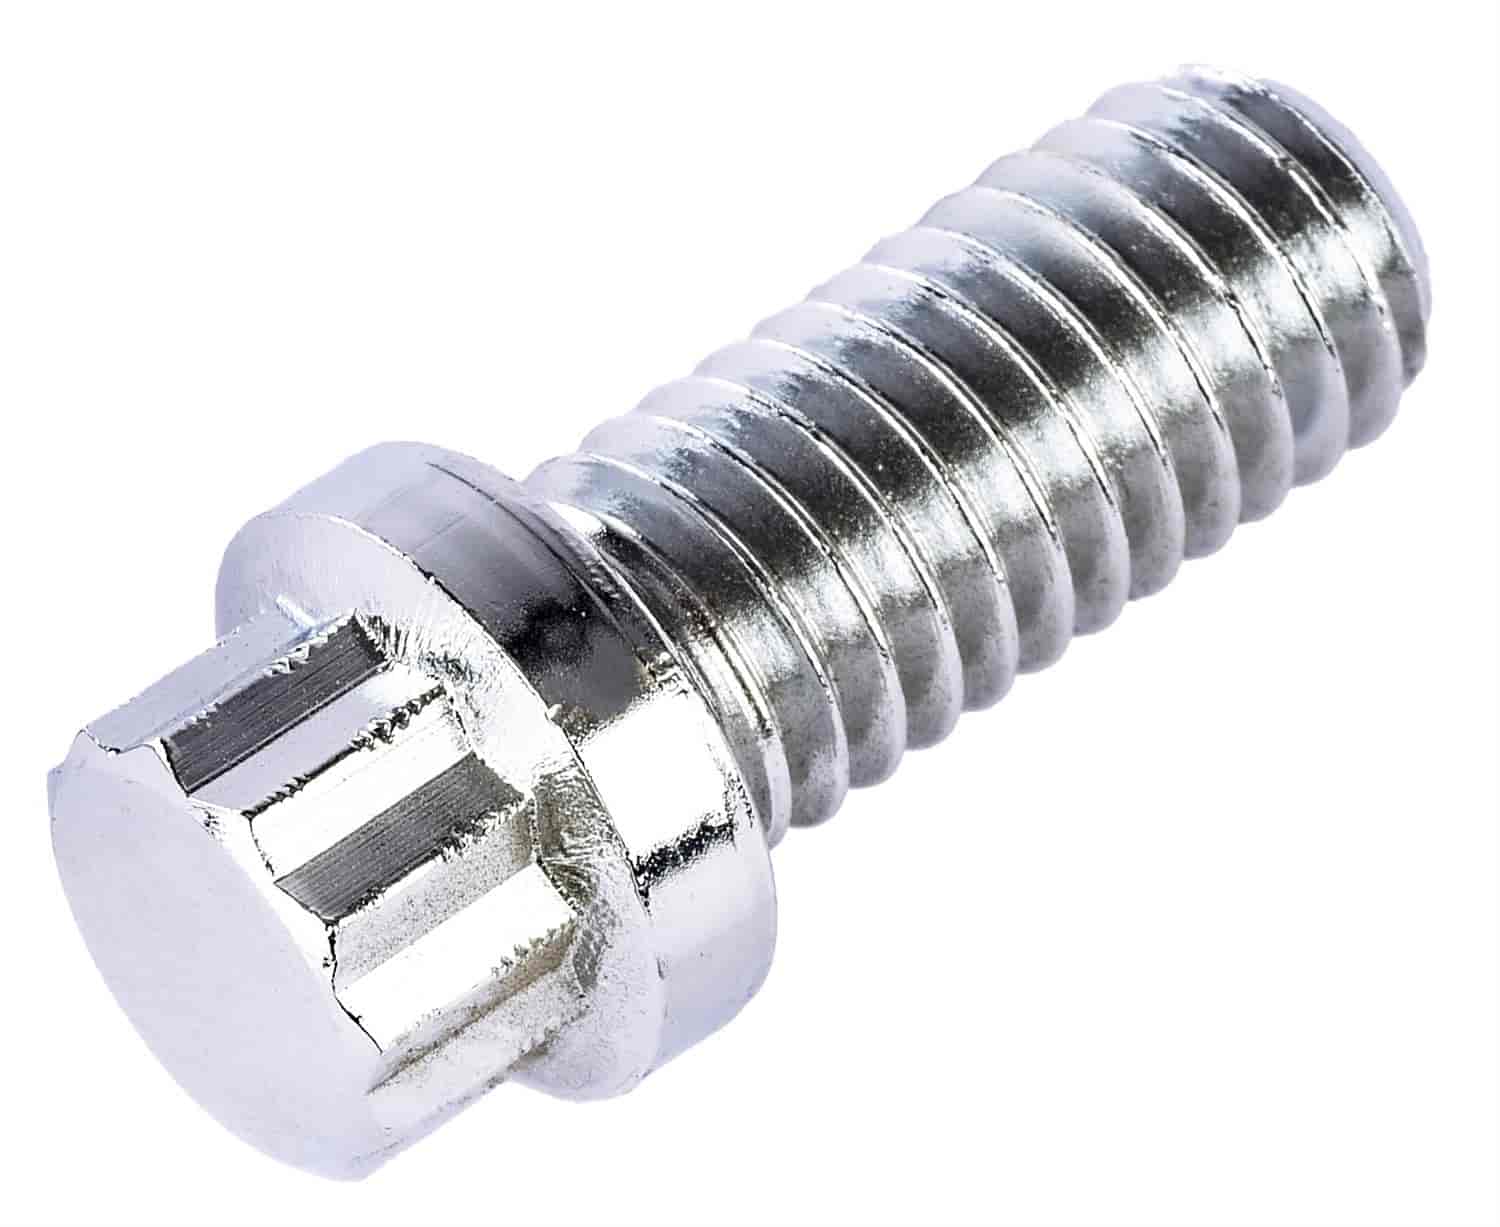 12-Point Fastener [3/8 in. -16 Thread x 7/8 (.875) in. Length]